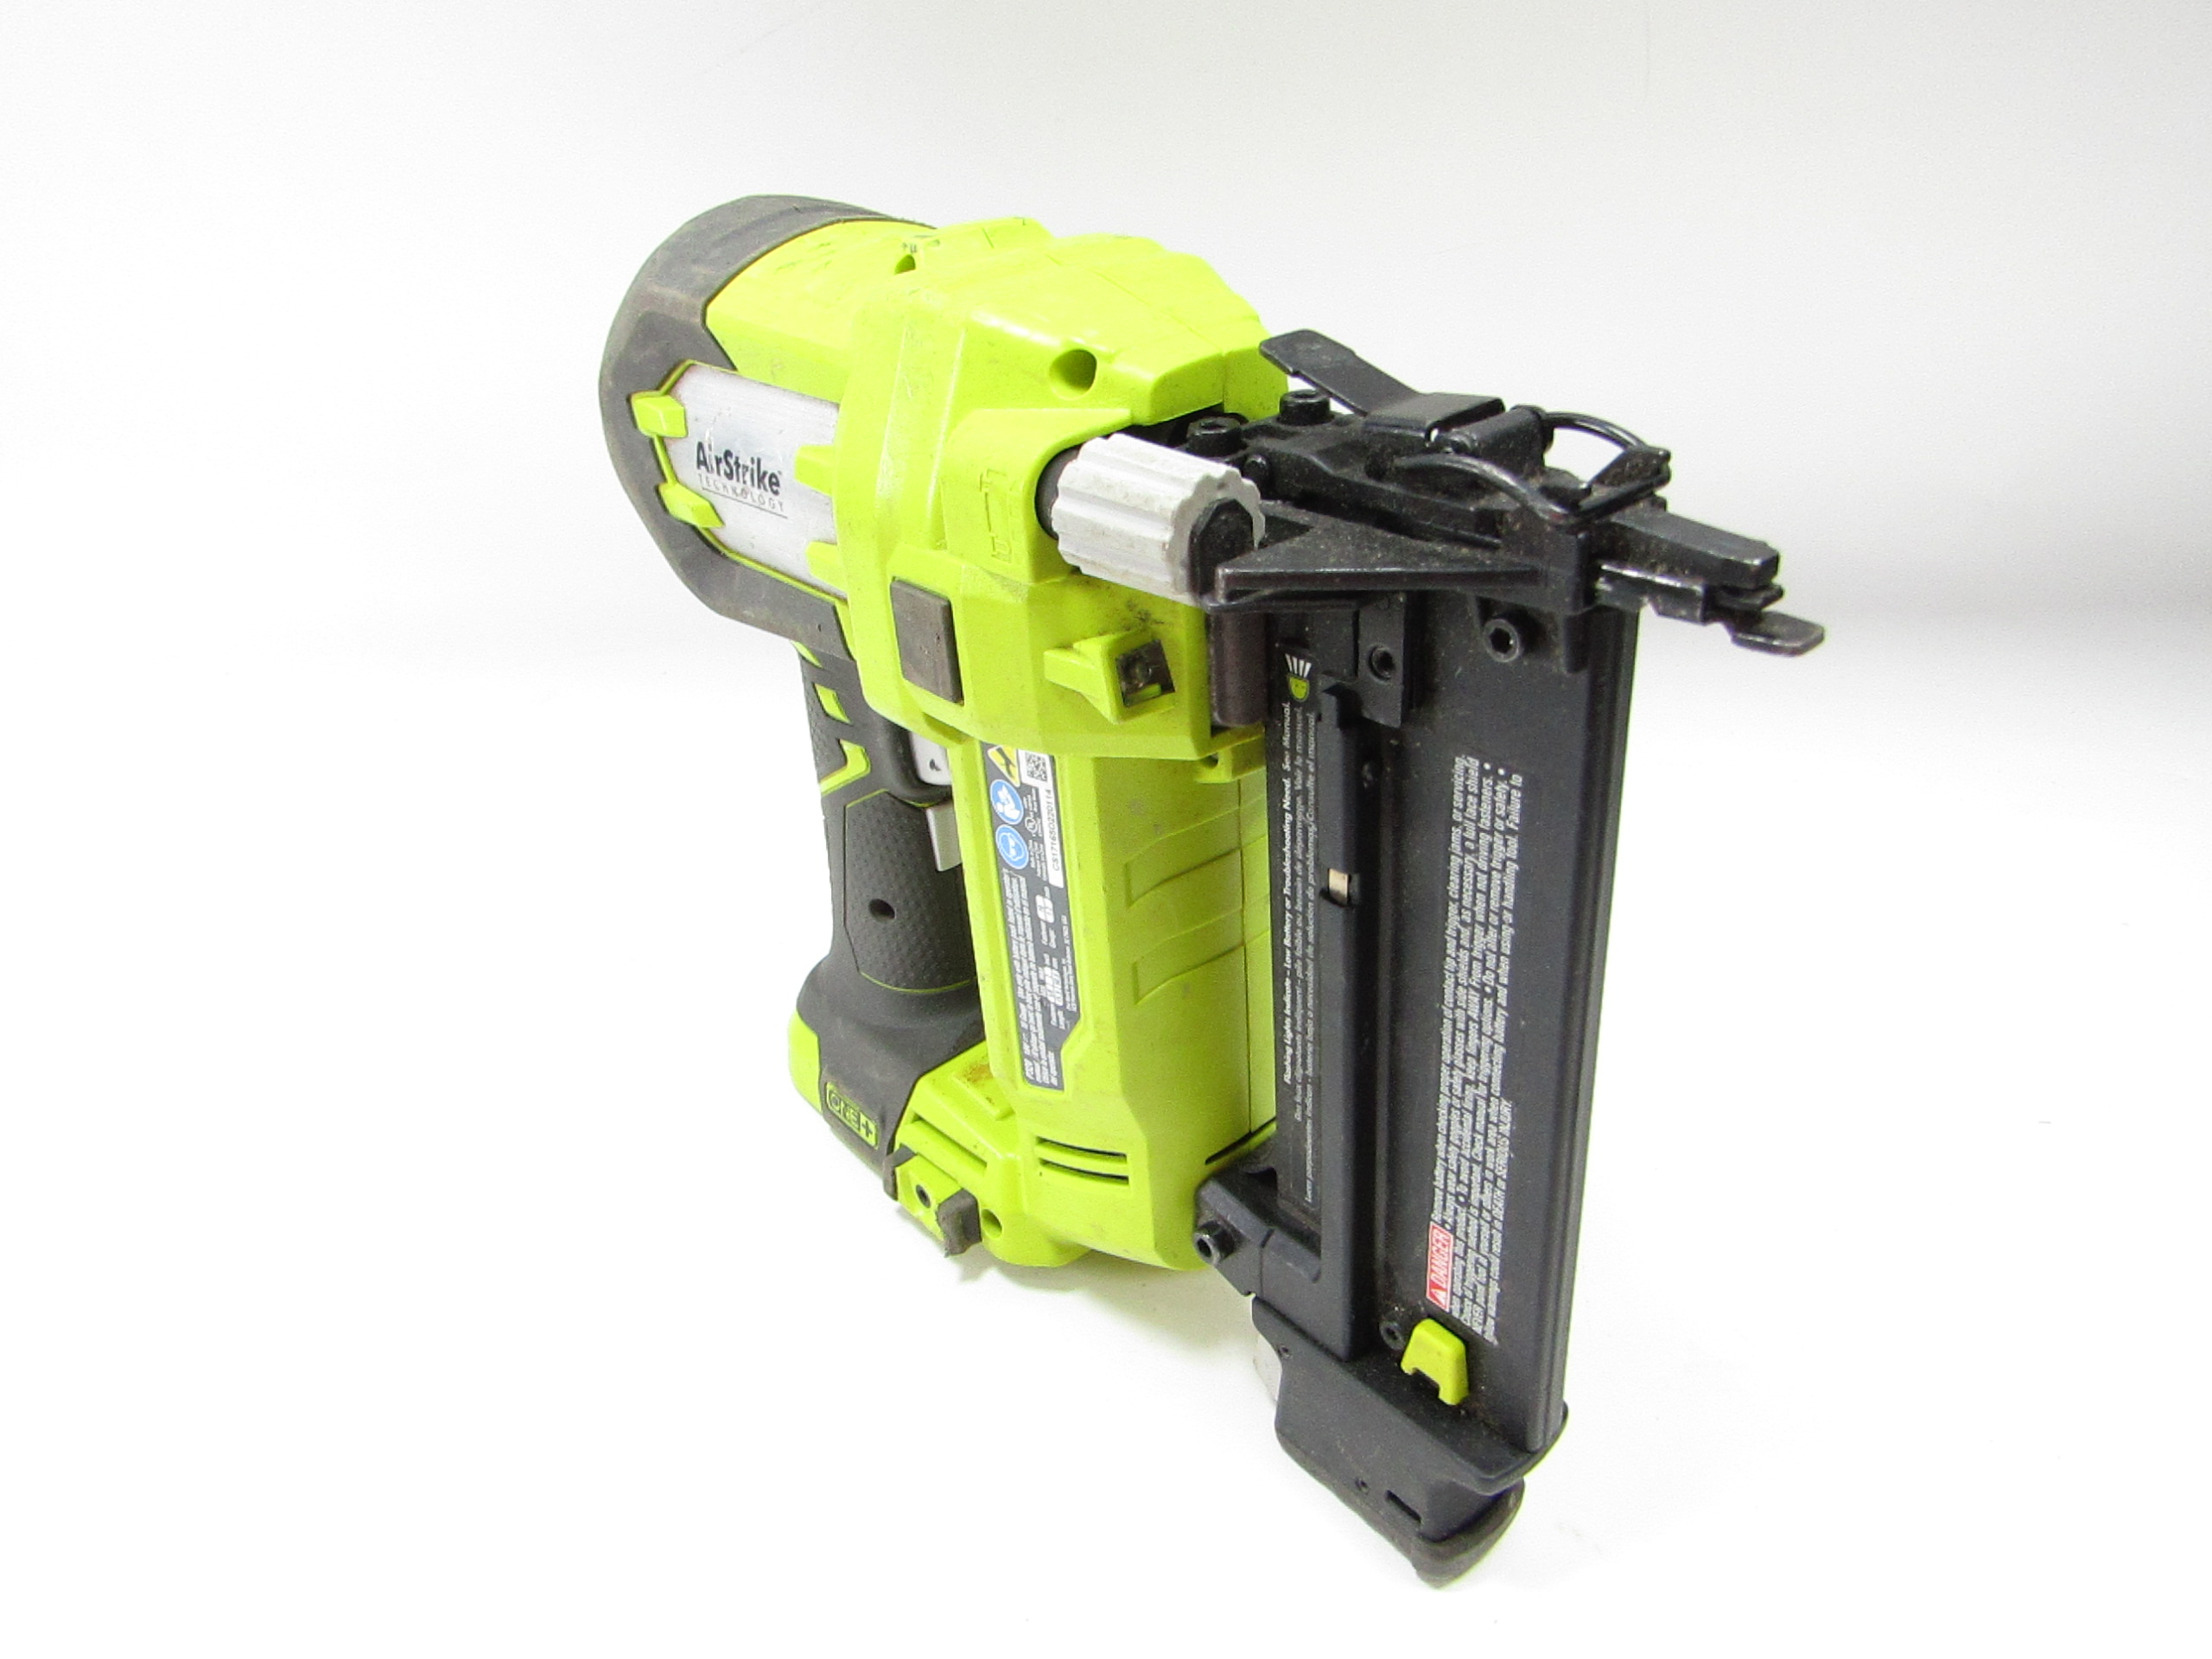 18-Volt One+ Airstrike 18-Gauge Cordless Brad Nailer (Tool-Only) Yes